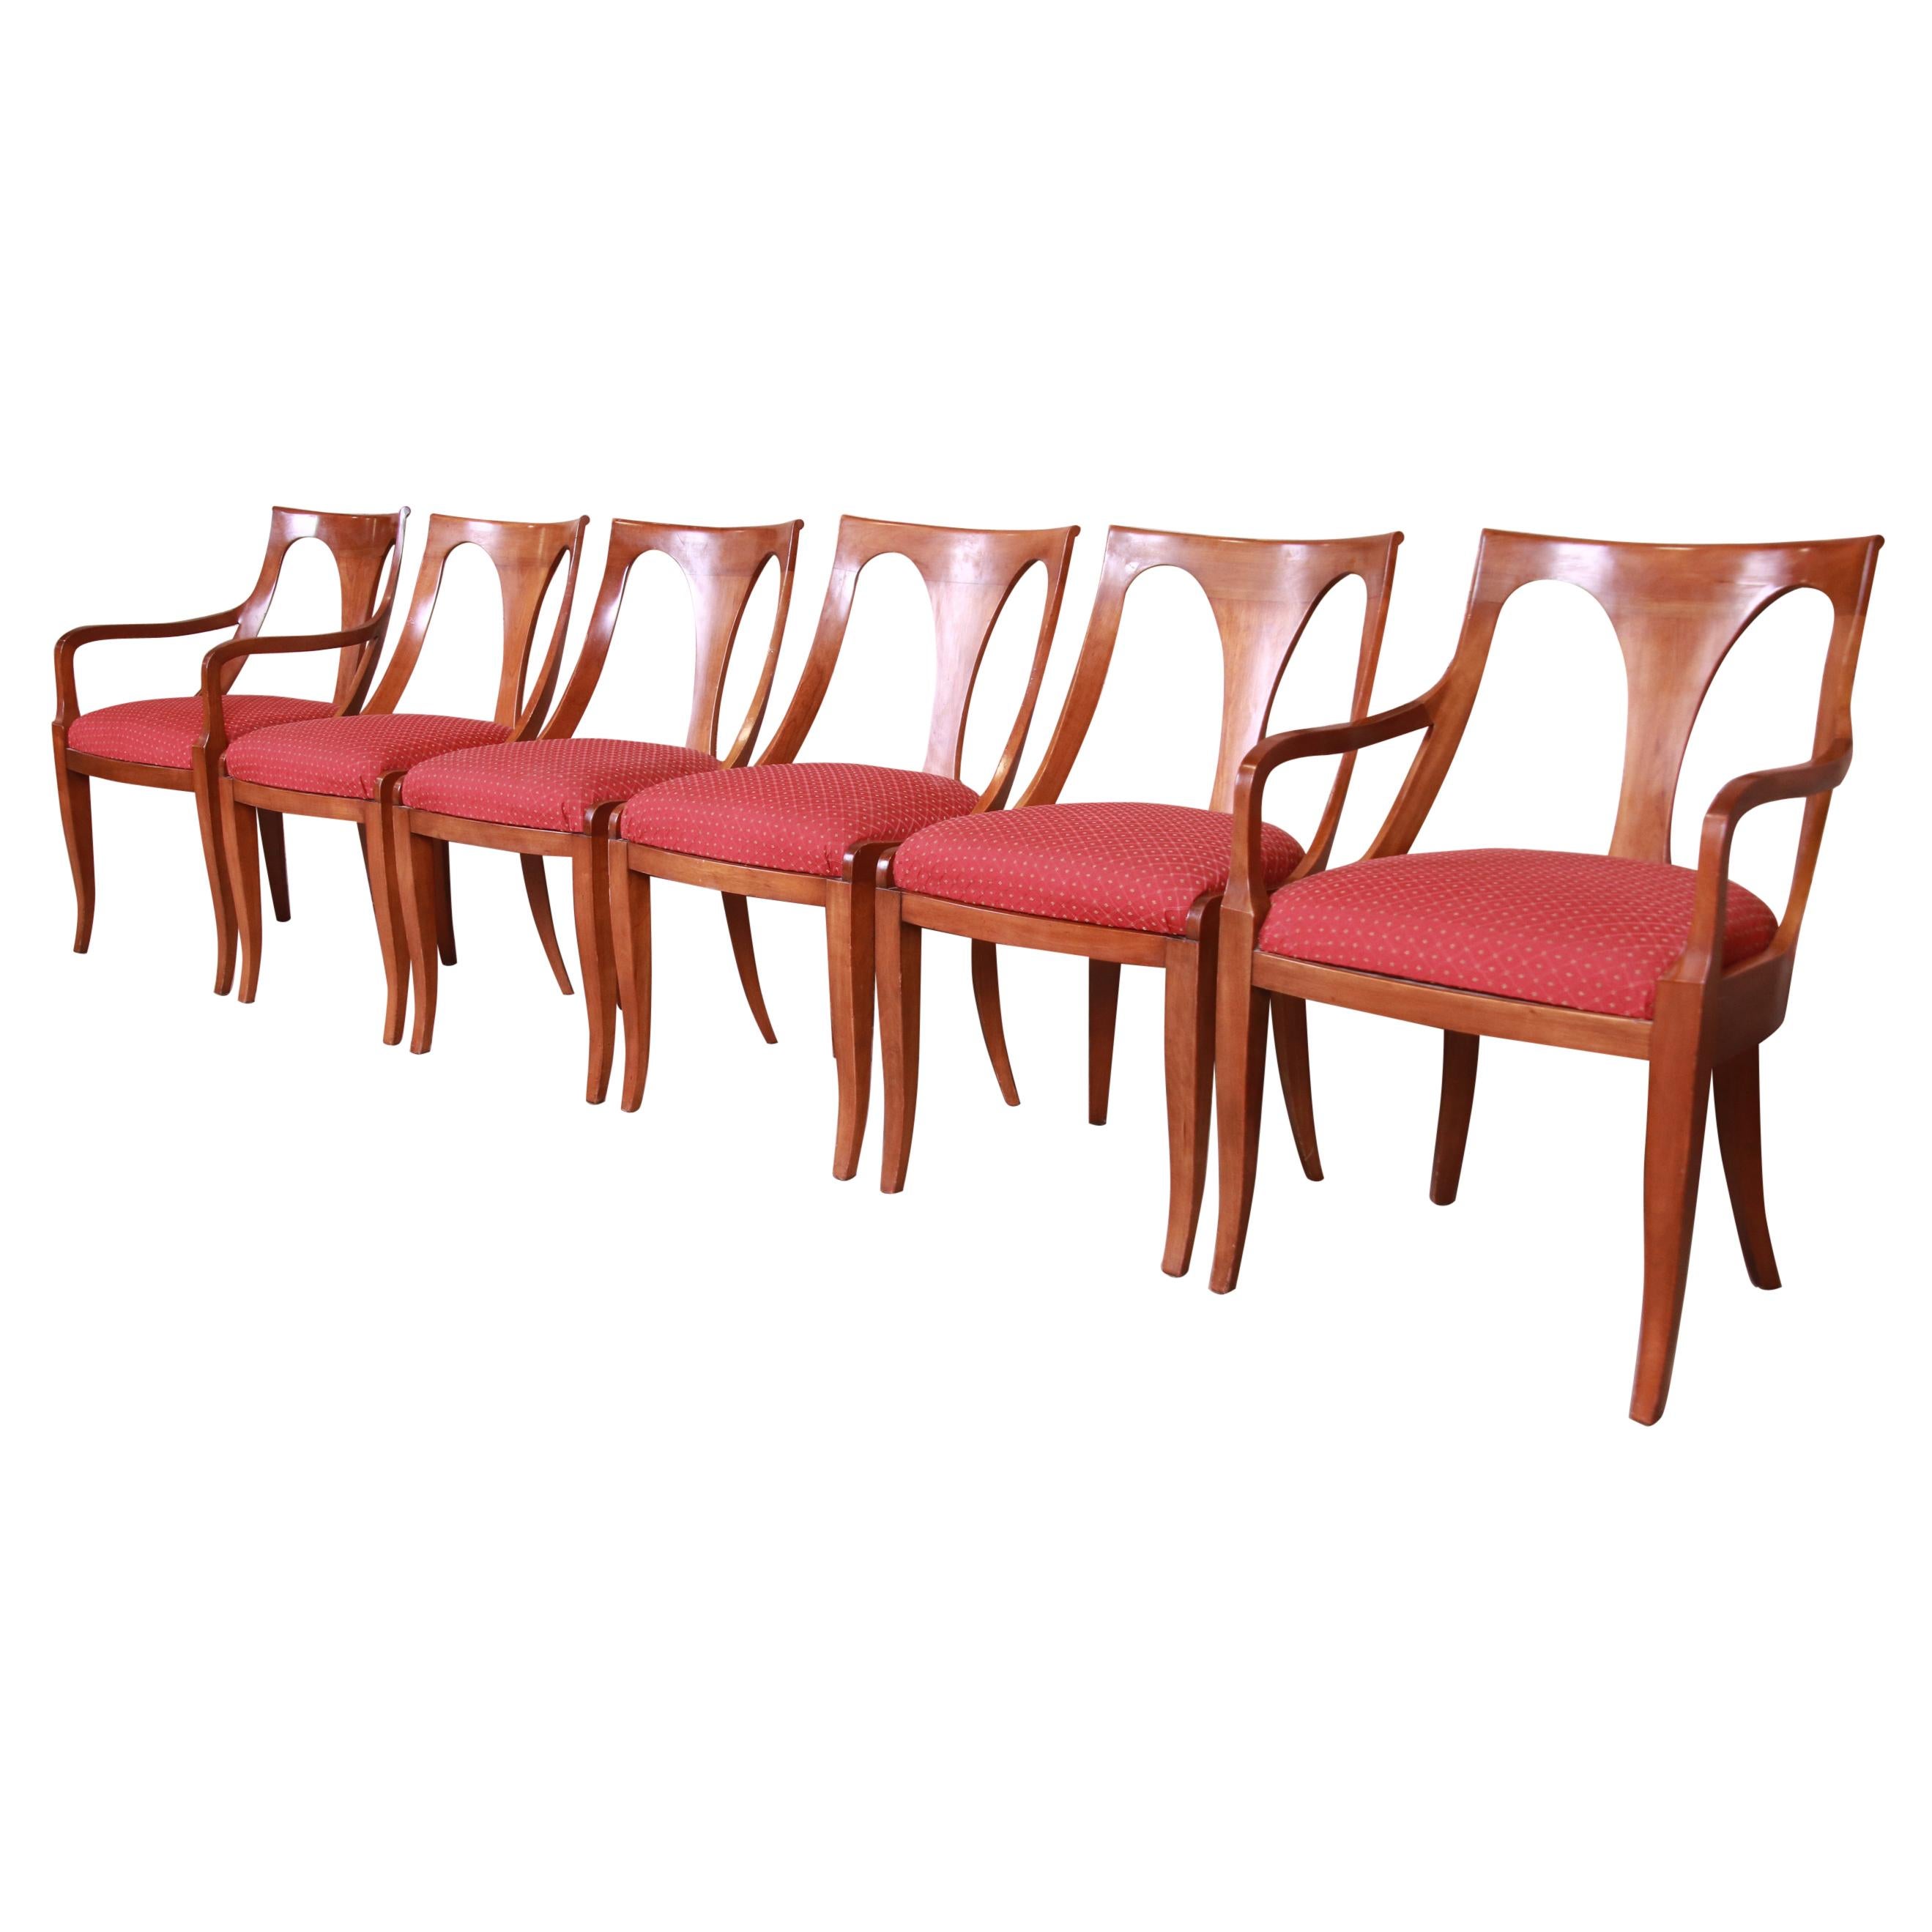 Kindel Furniture Regency Cherry Wood Dining Chairs, Set of Six